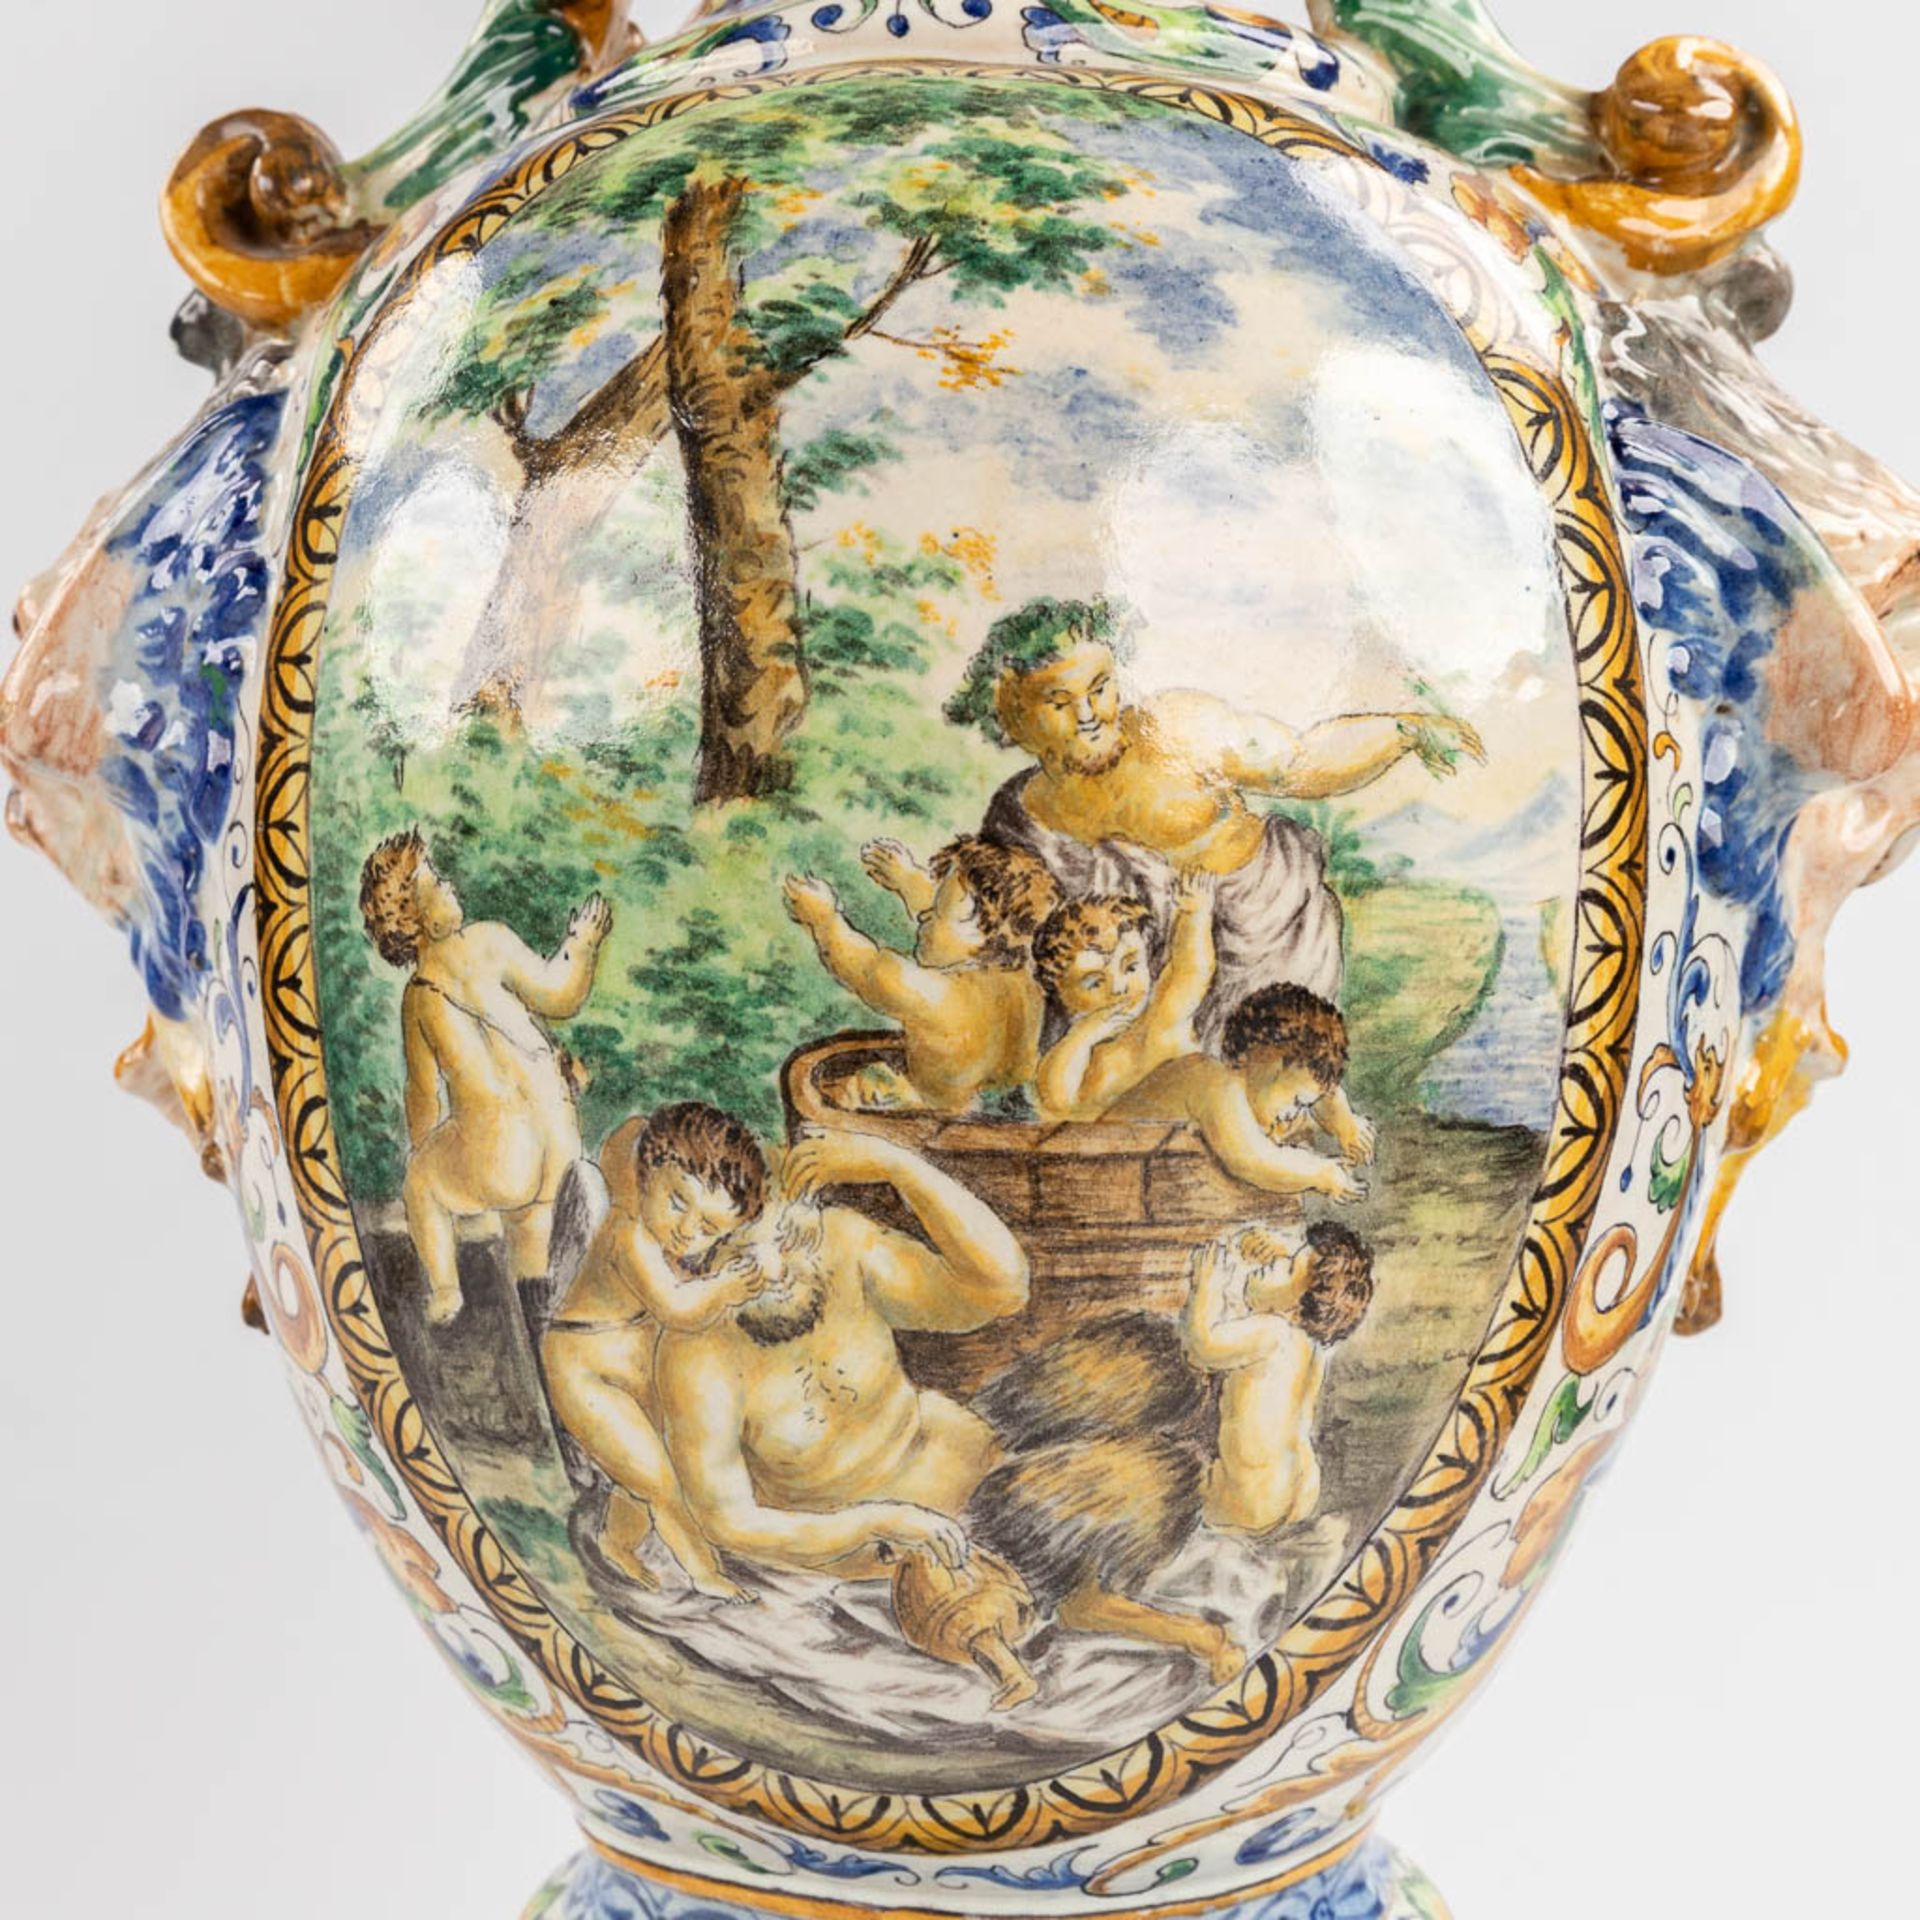 A pair of large vases, Italian Renaissance style, glazed faience. 20th C. (D:45 x W:45 x H:205 cm) - Image 12 of 31